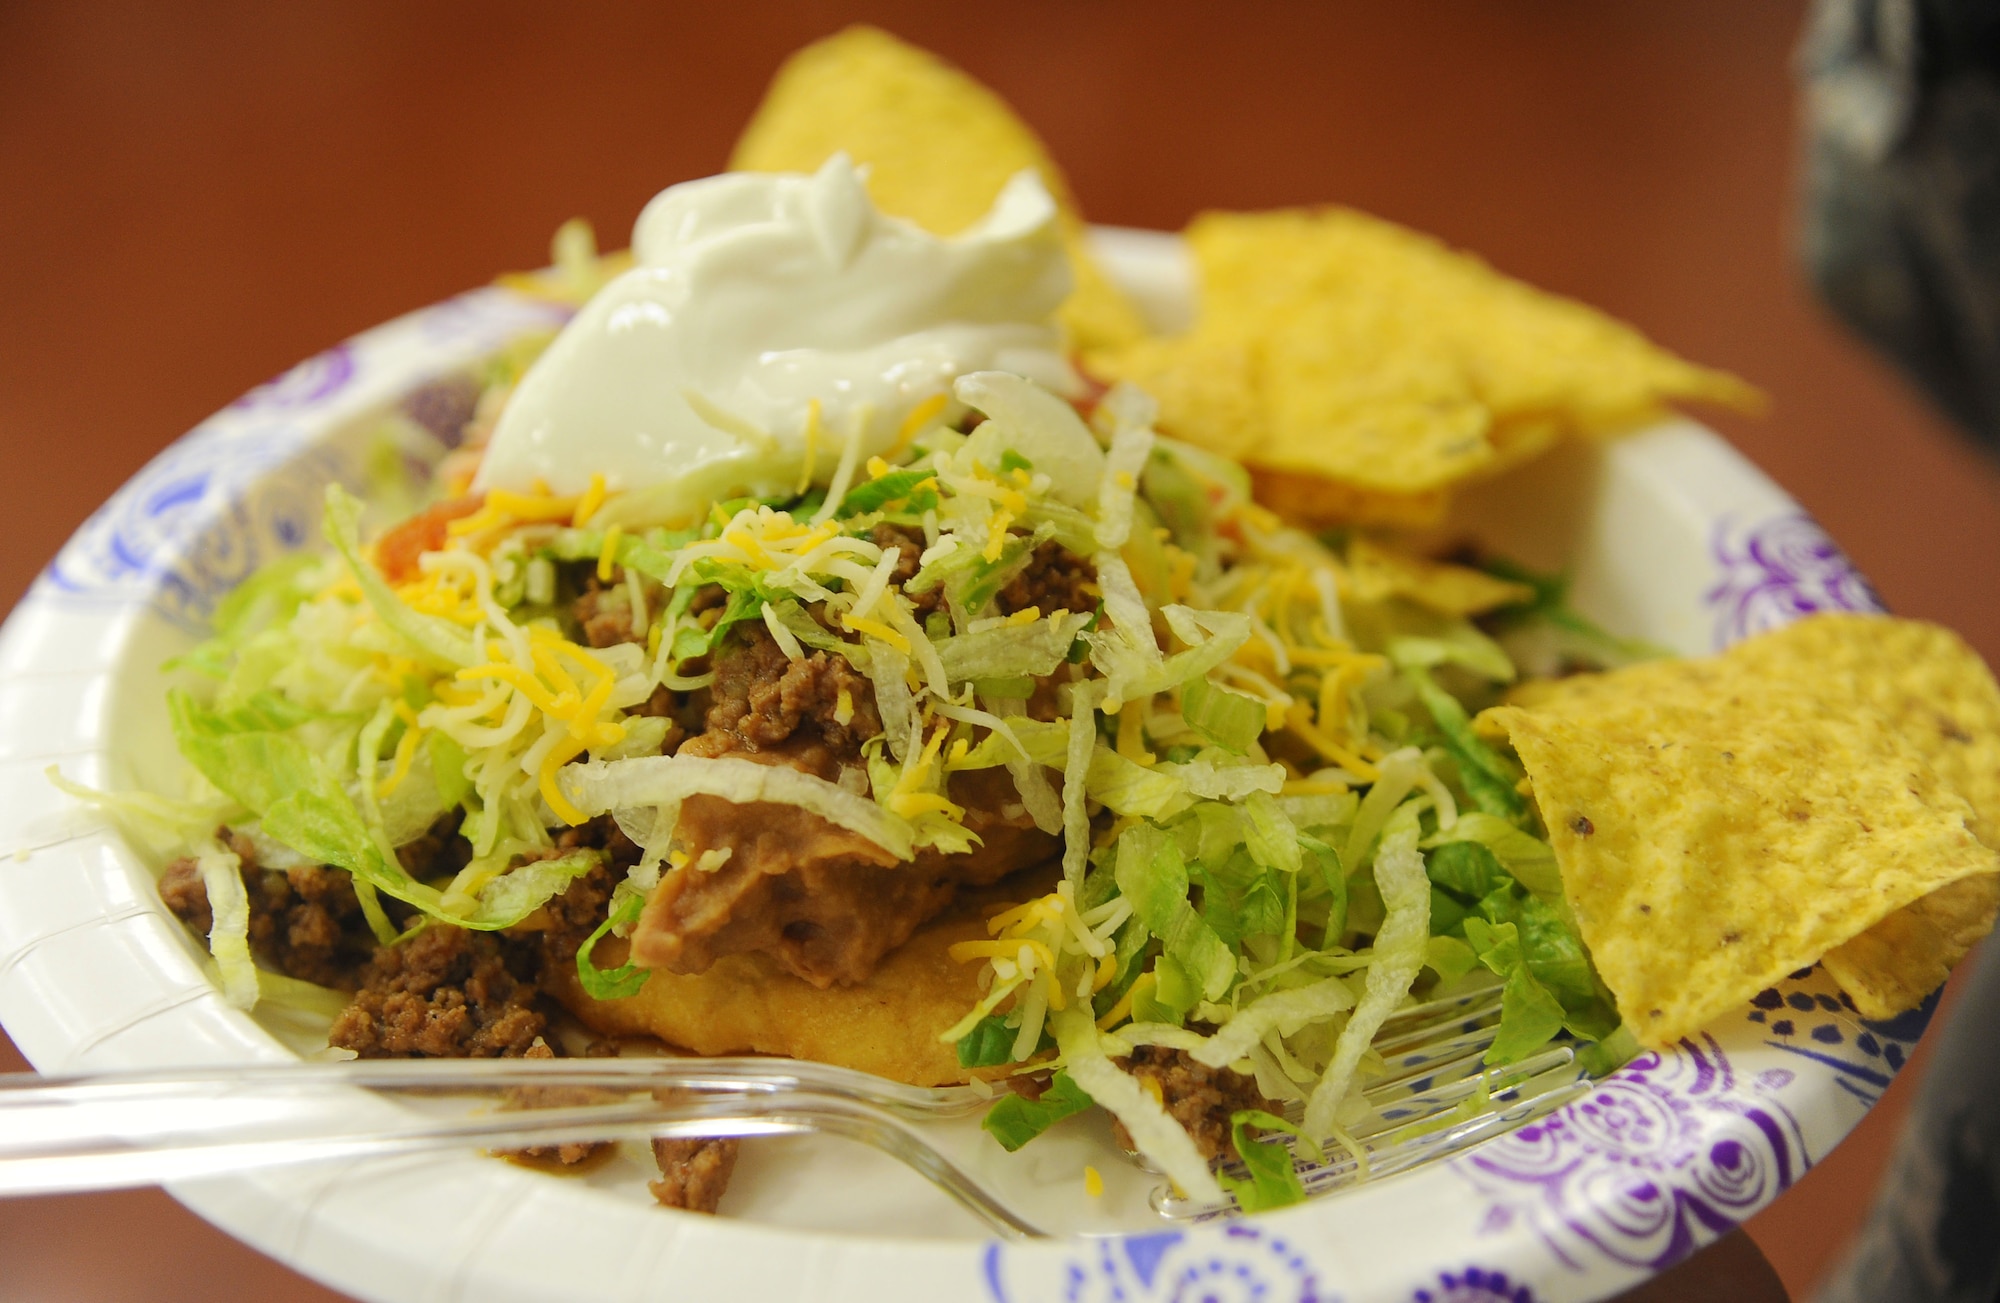 A fry bread taco sits on a plate during a Native American Heritage month luncheon at MacDill Air Force Base, Fla., Nov. 29, 2016. Fry bread tacos were one of the foods served at the luncheon and are a common food among many tribes. (U.S. Air Force photo by Airman 1st Class Adam R. Shanks)